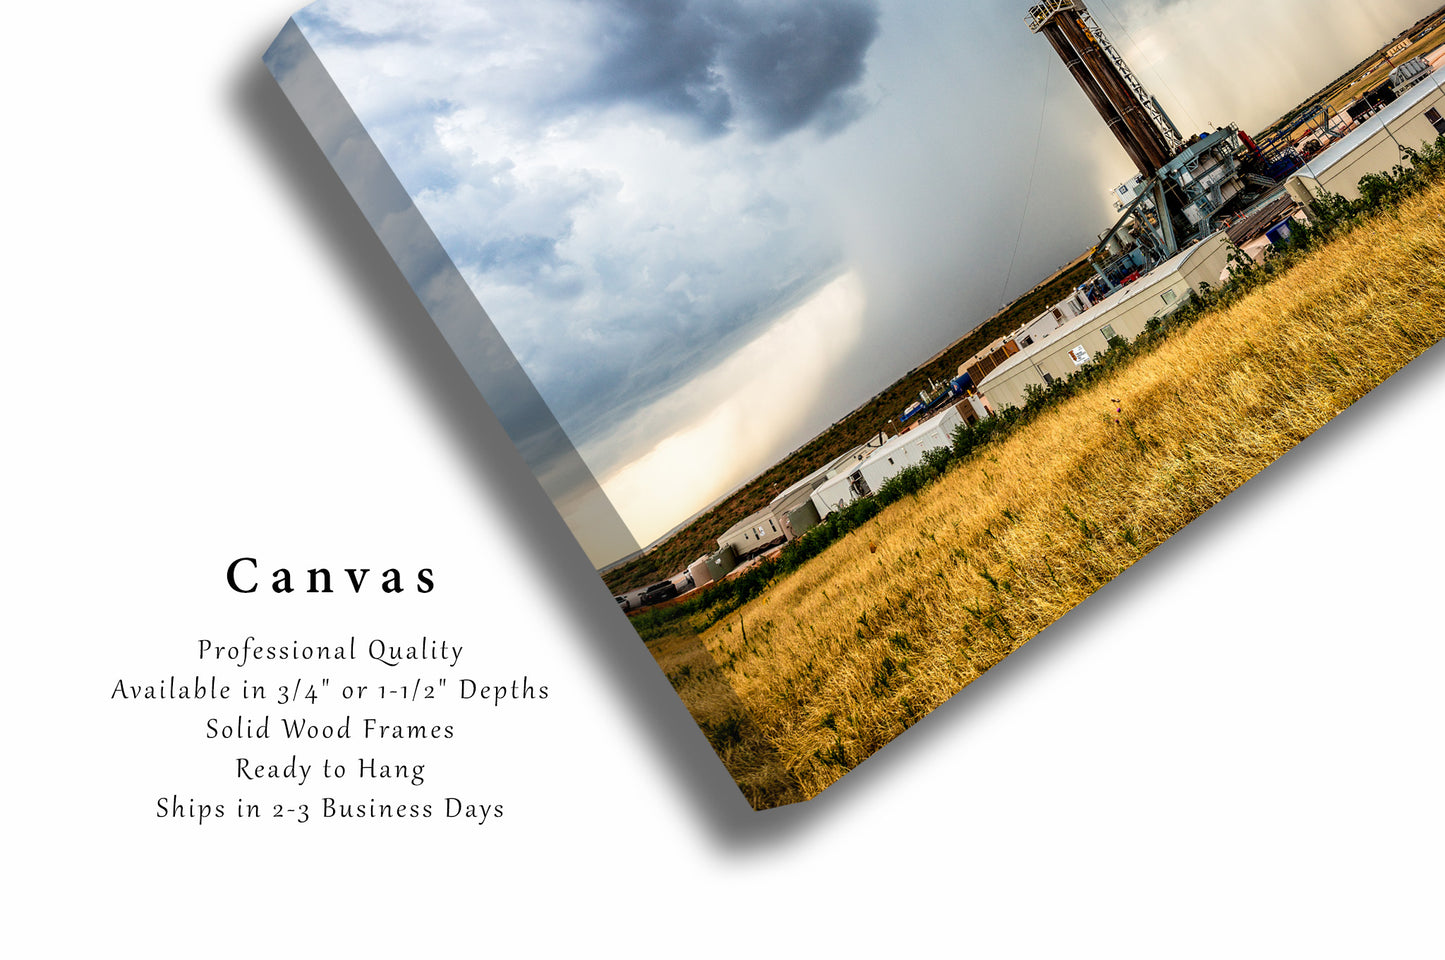 Oilfield Canvas Wall Art (Ready to Hang) Gallery Wrap of Drilling Rig and Storm on Summer Day in Oklahoma Thunderstorm Photography Oil and Gas Decor